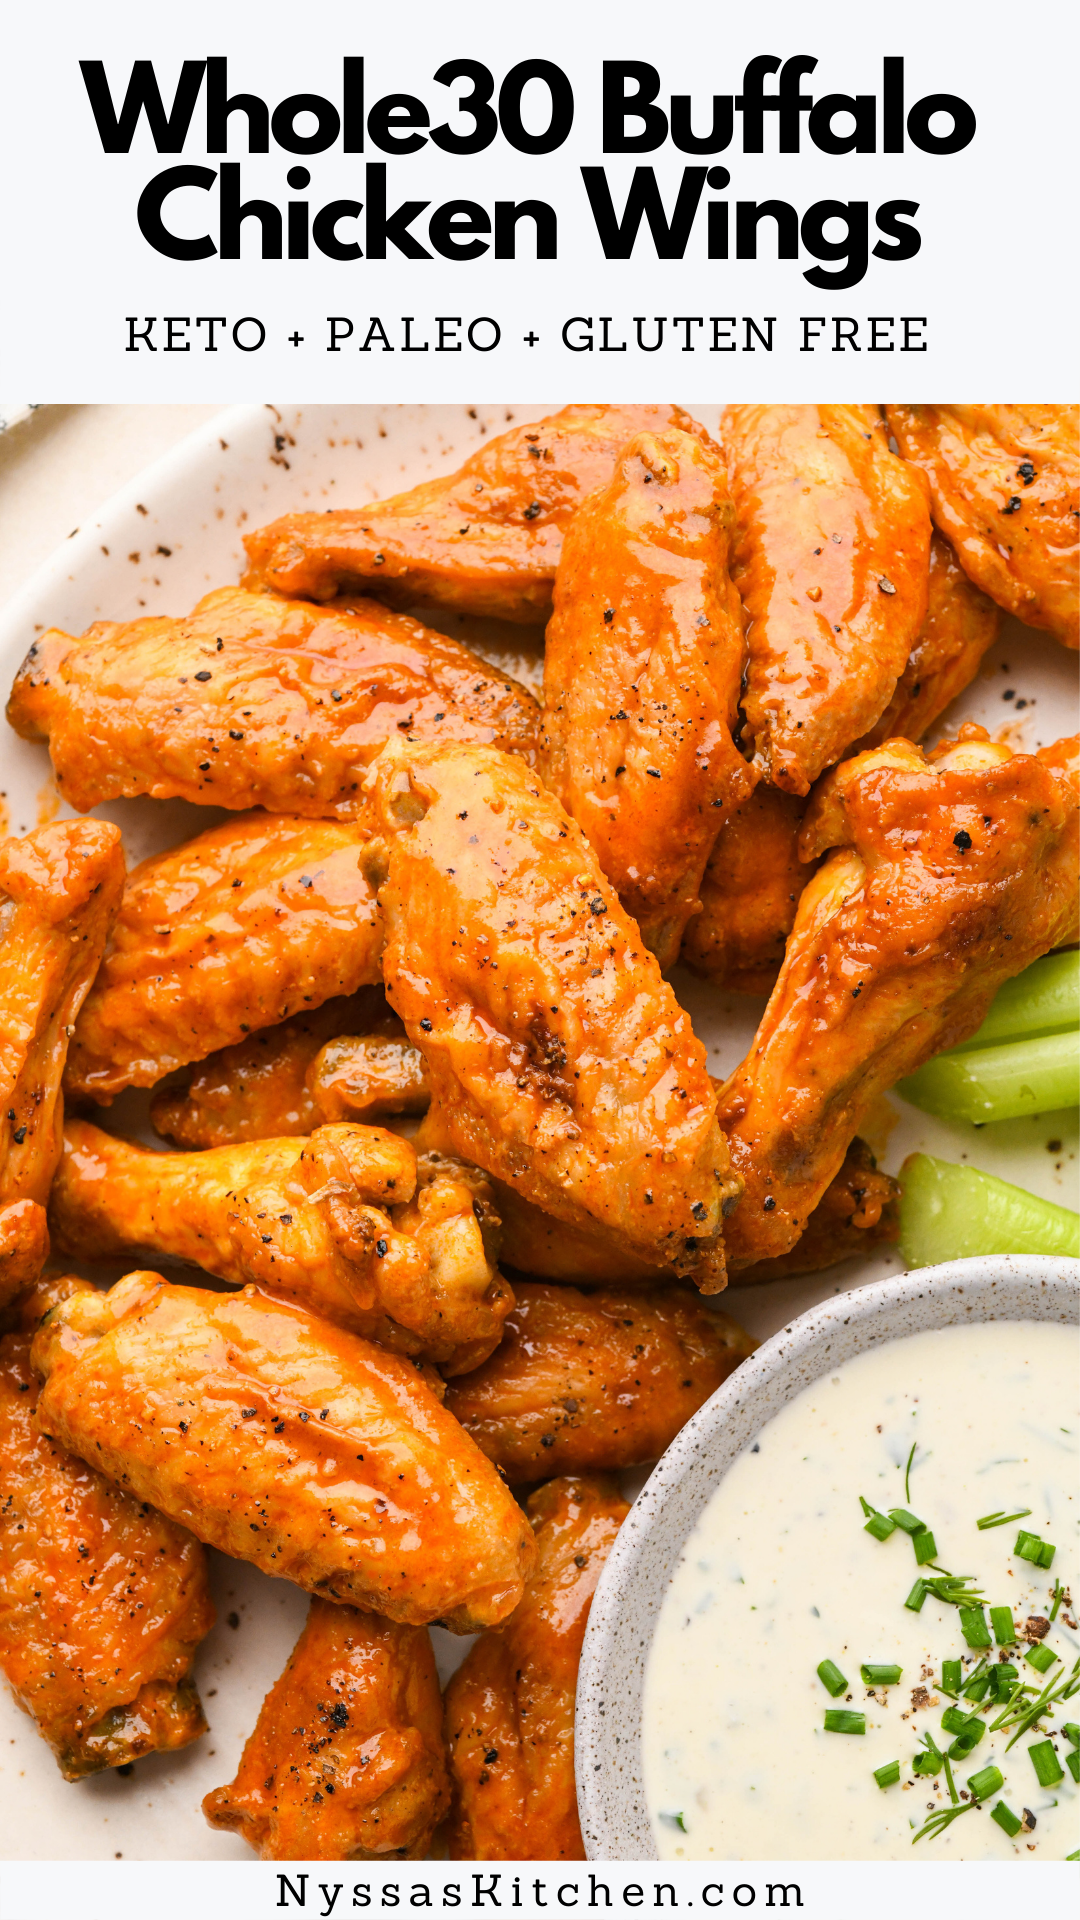 These crispy baked buffalo chicken wings are so easy to make and super delicious! Perfect for a party, game day, or main course at dinner. Baked in the oven (made without frying!) until crispy on the outside and tender on the inside, and tossed in a zippy, hot buffalo sauce. So good dipped in creamy ranch dressing! Whole30 compatible, paleo friendly, gluten free, and keto / low carb.